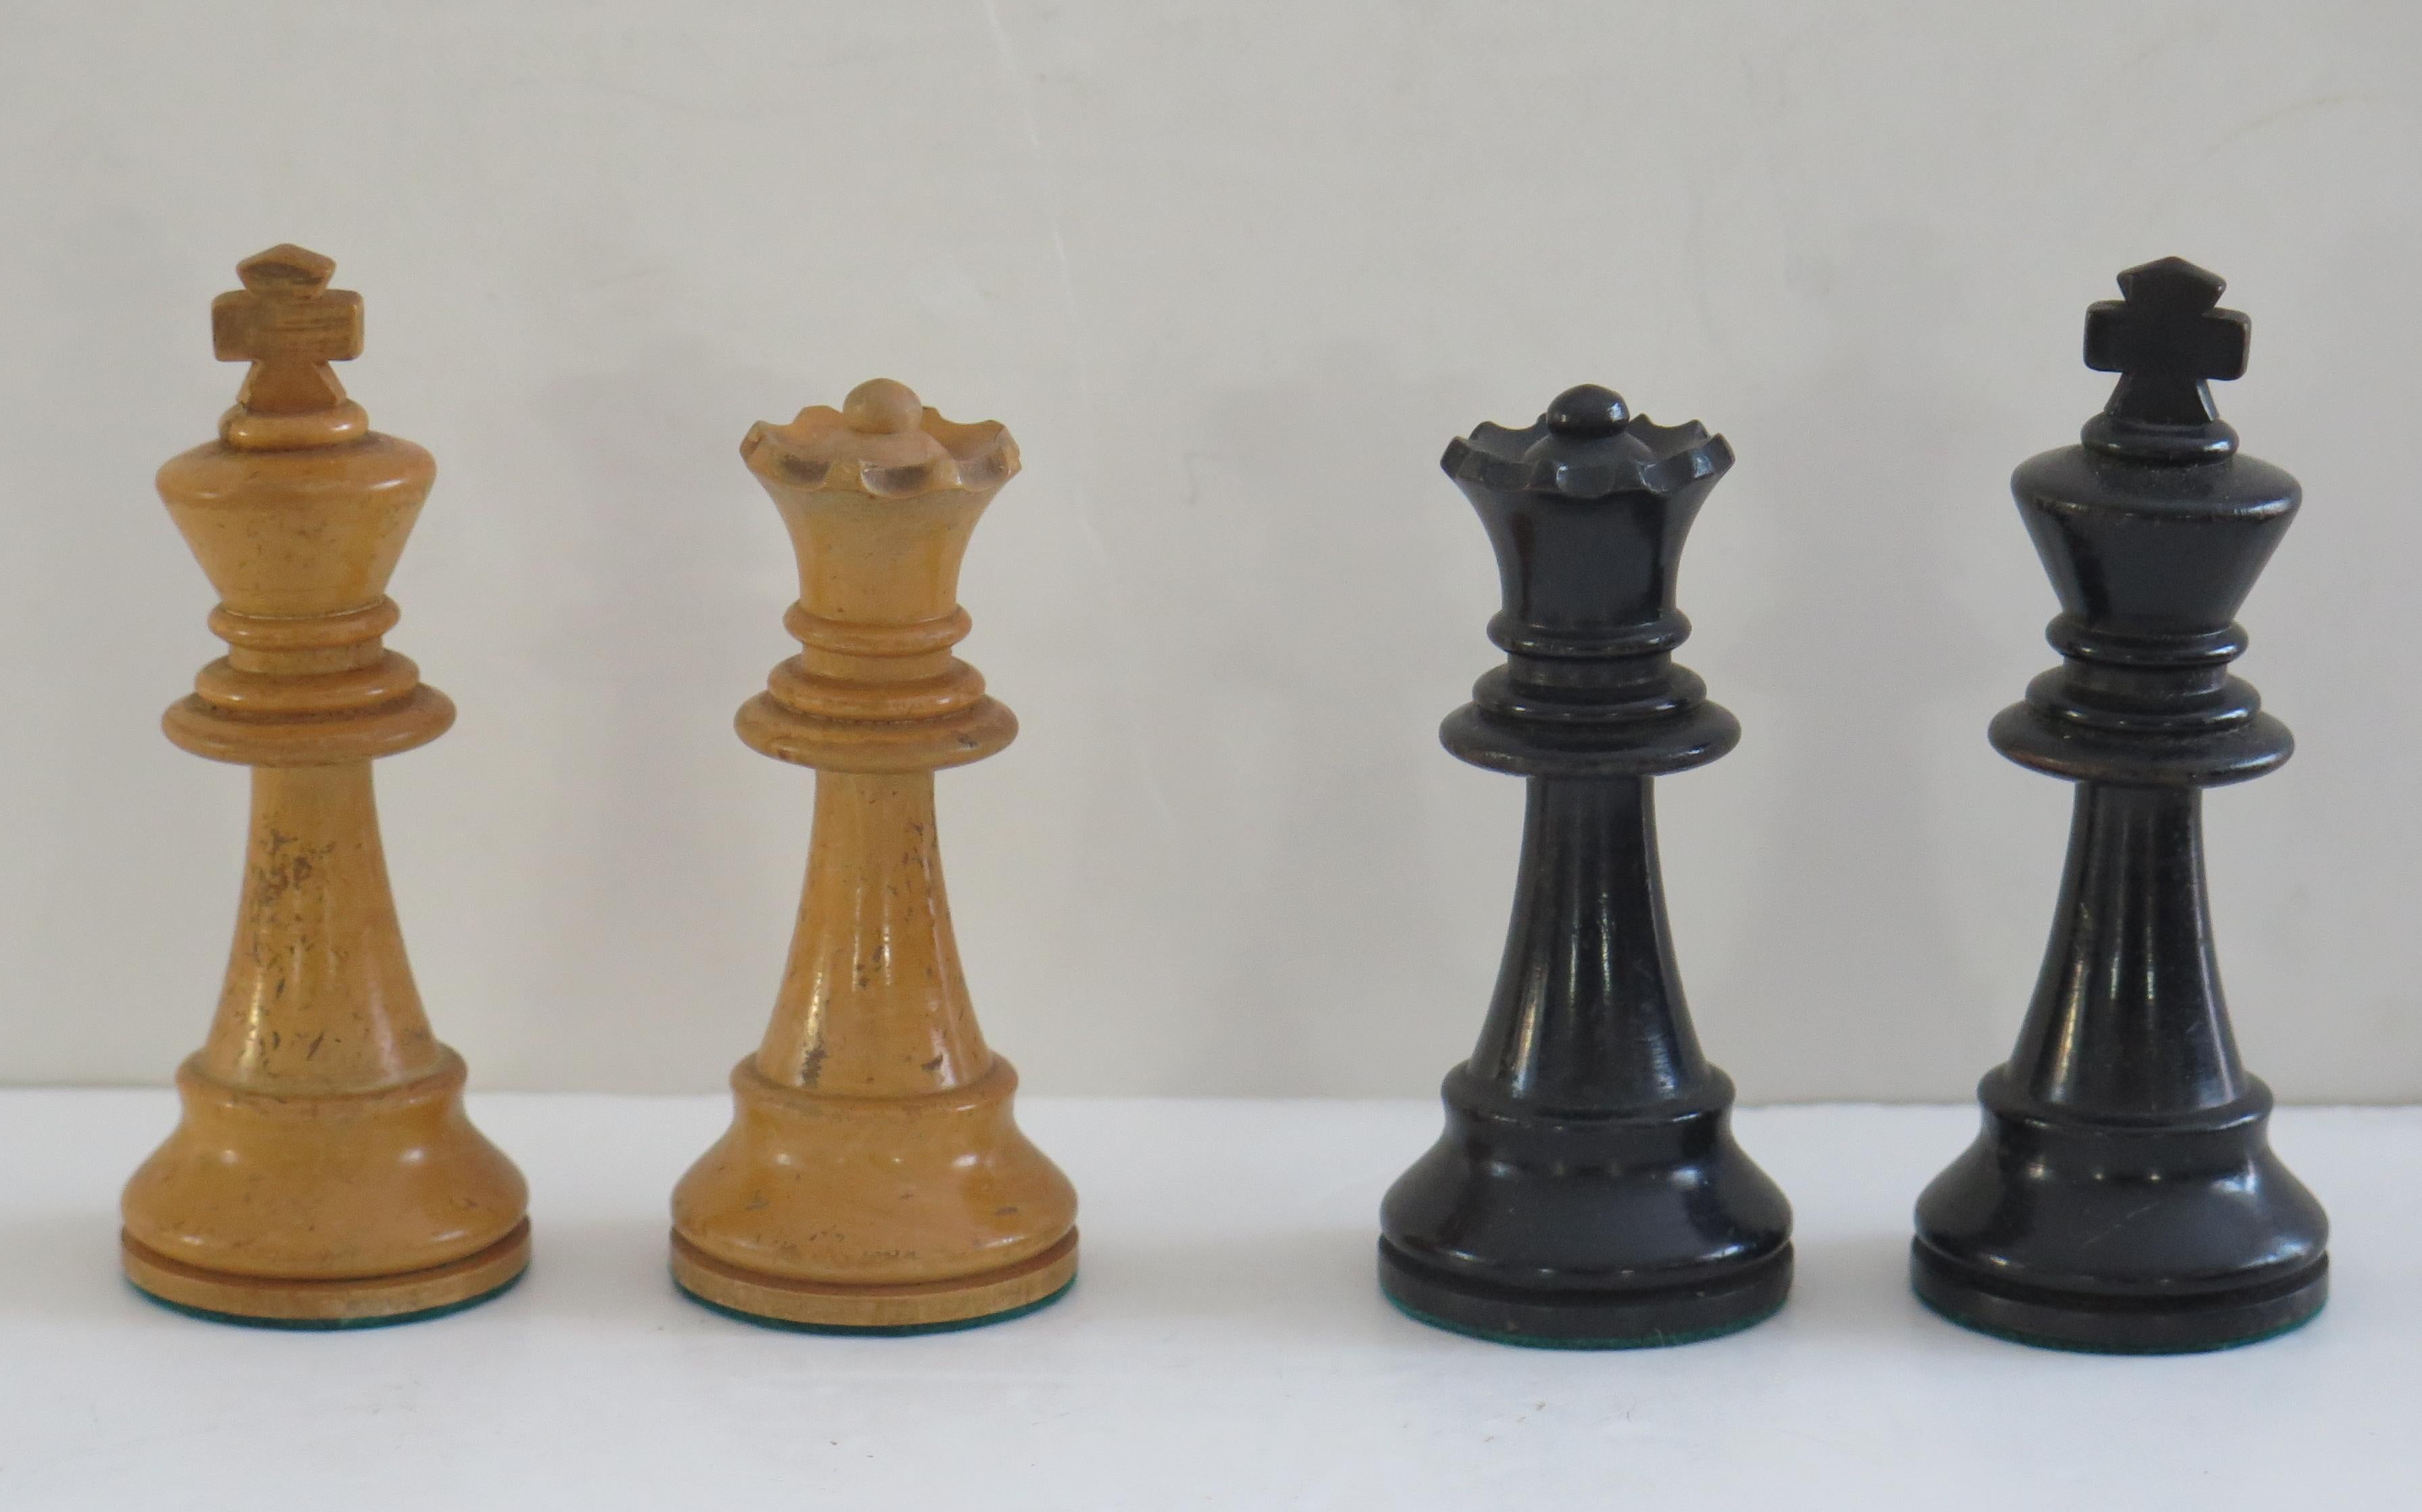 British Antique Weighted Chess Set 95mm Kings Fierce Knight Boxed, K&C London Ca 1900